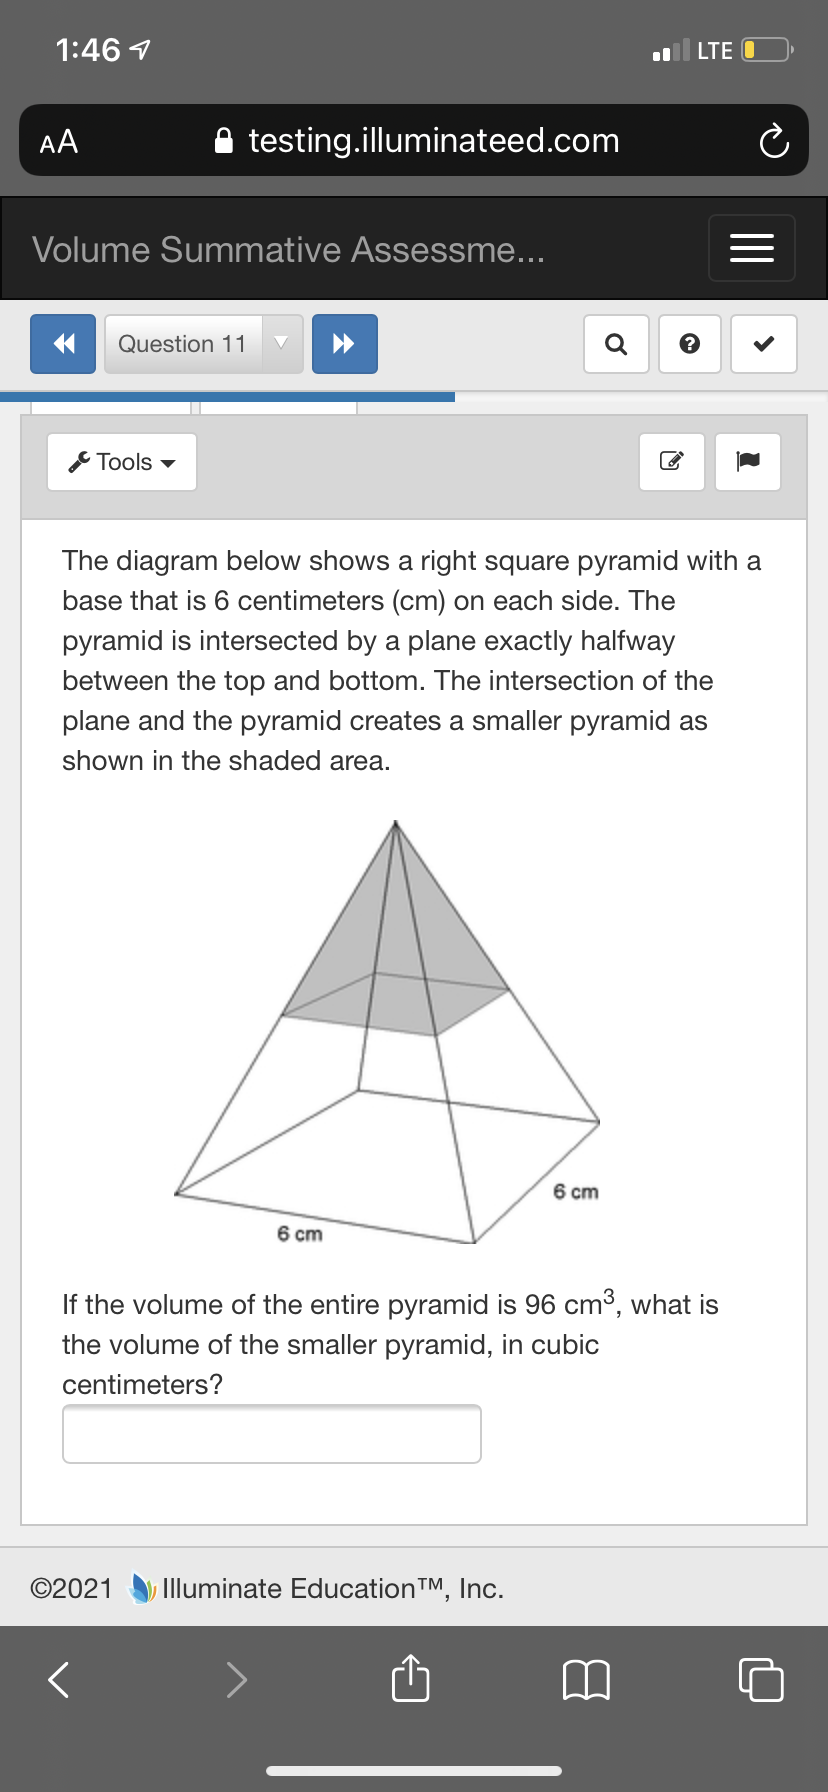 1:46 1
LTE O
AA
testing.illuminateed.com
Volume Summative Assessme...
Question 11
Tools -
The diagram below shows a right square pyramid with a
base that is 6 centimeters (cm) on each side. The
pyramid is intersected by a plane exactly halfway
between the top and bottom. The intersection of the
plane and the pyramid creates a smaller pyramid as
shown in the shaded area.
6 cm
6 cm
If the volume of the entire pyramid is 96 cm3, what is
the volume of the smaller pyramid, in cubic
centimeters?
©2021
Illuminate EducationTM, Inc.
